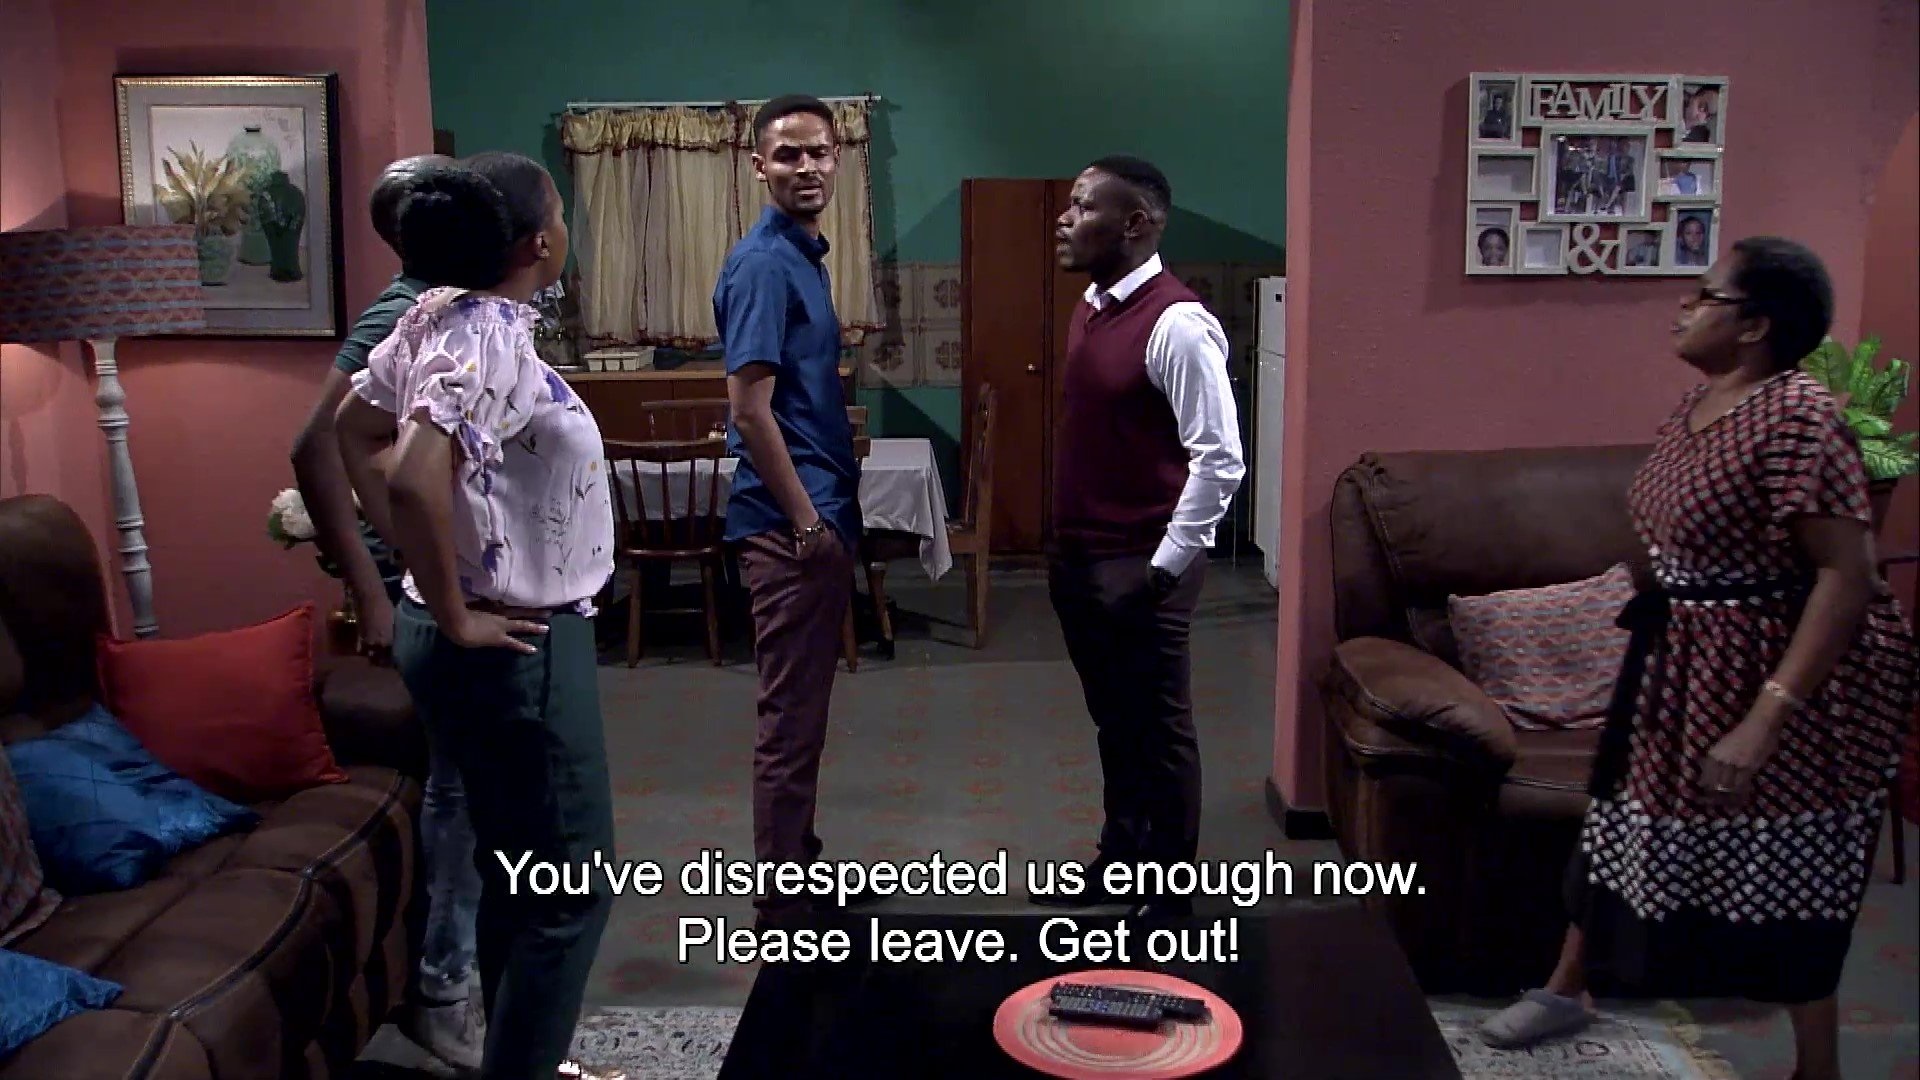 The Maputla sons almost get into a physical altercation.